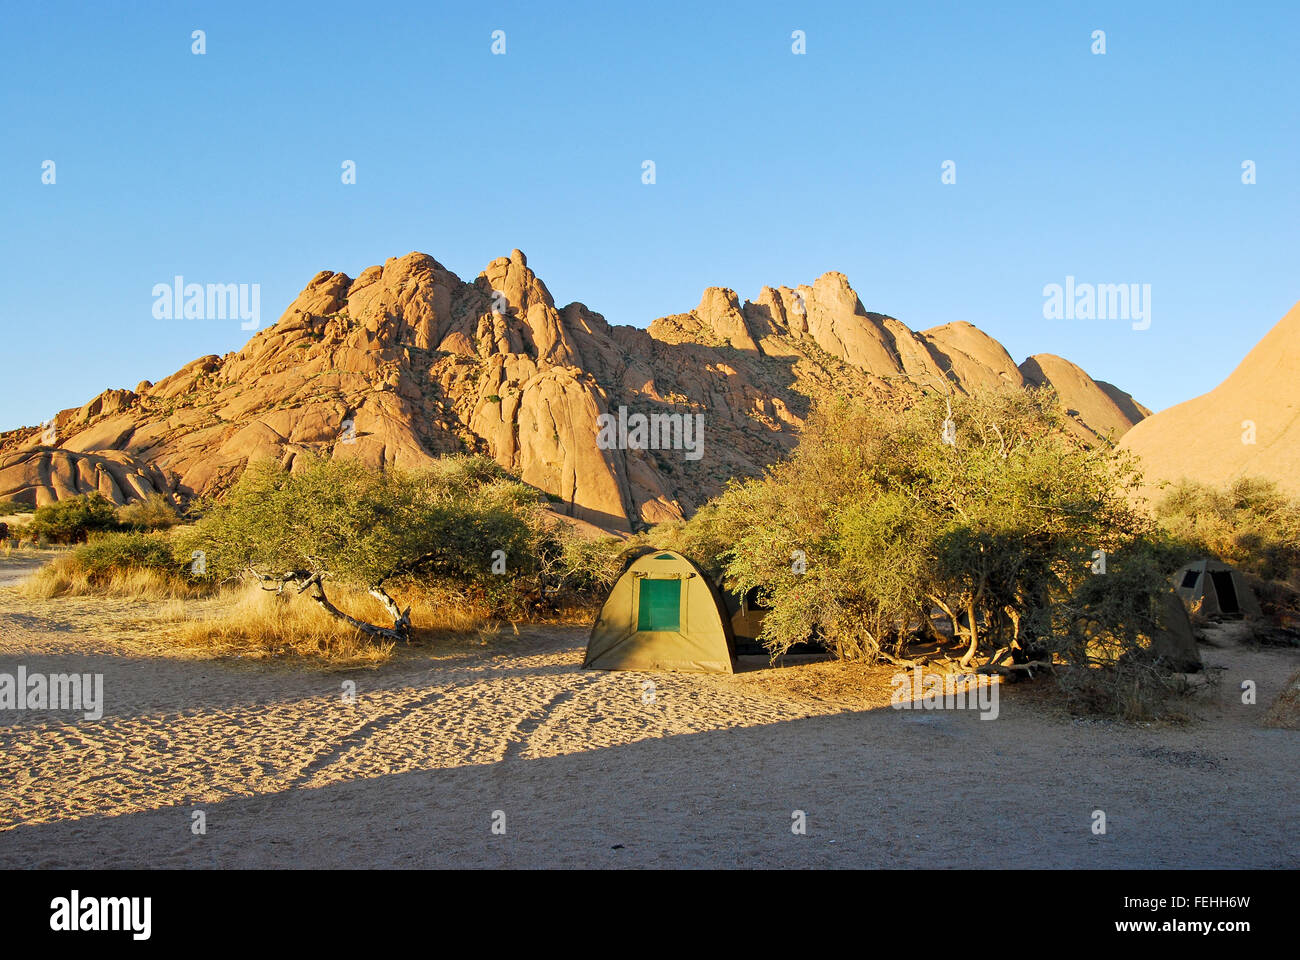 Camping site at Spitzkoppe in the Namib desert of Namibia Africa Stock Photo